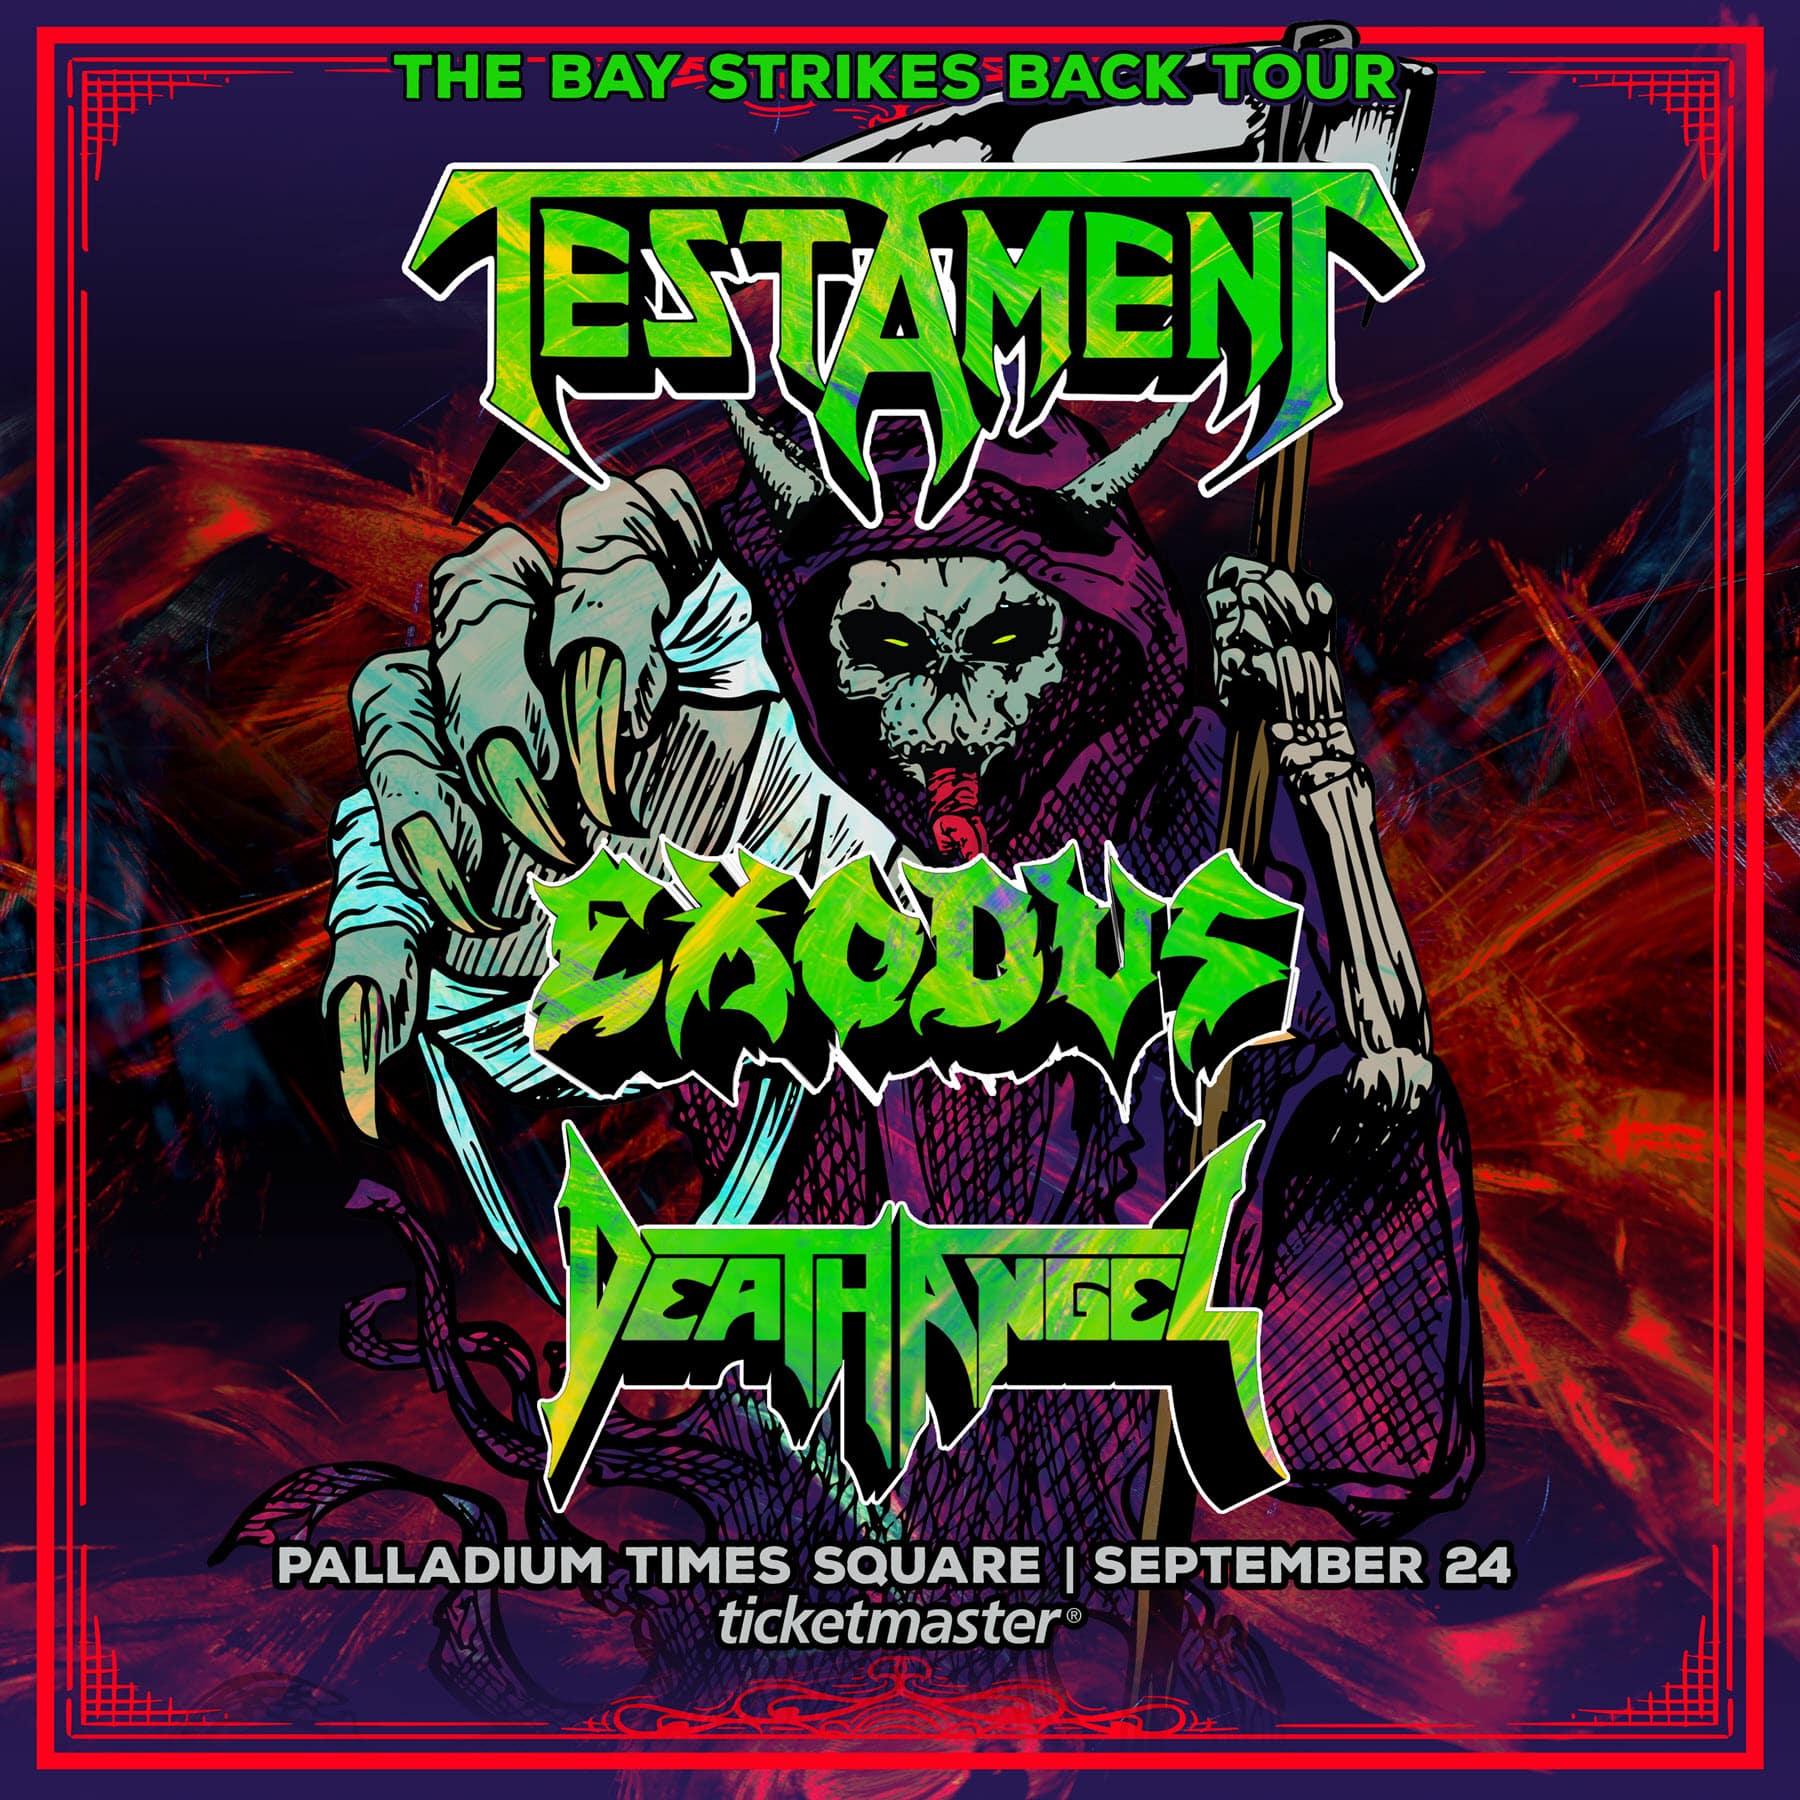 TESTAMENT: THE BAY STRIKES BACK TOUR w/ EXODUS and DEATH ANGEL